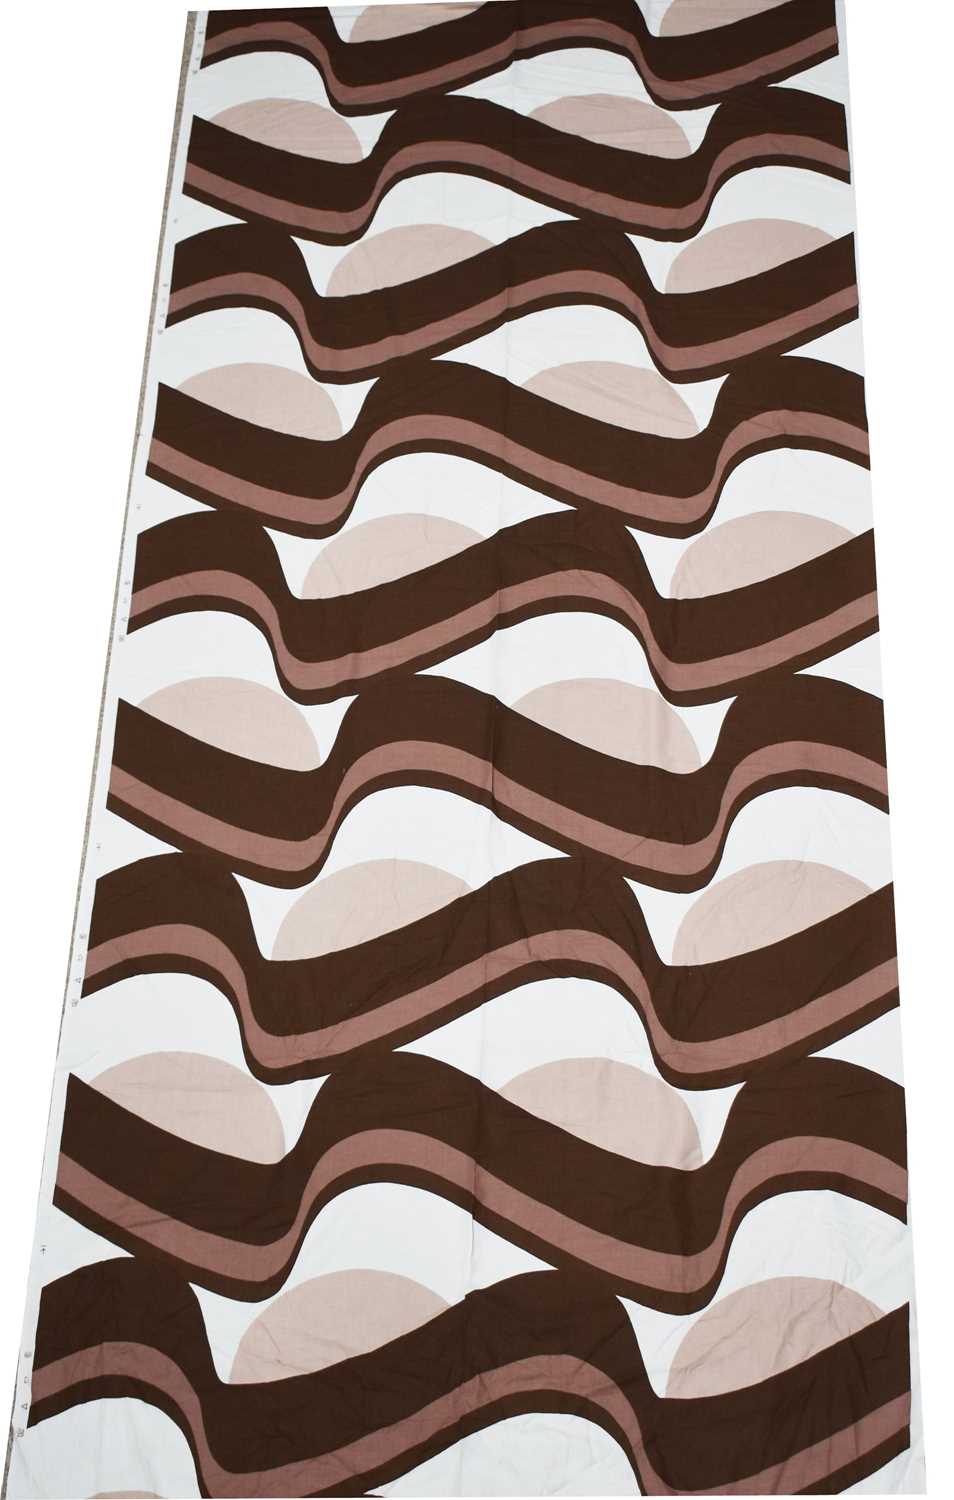 Lot 1021 - Vintage Fabric: a roll of brown & white swirl printed fabric